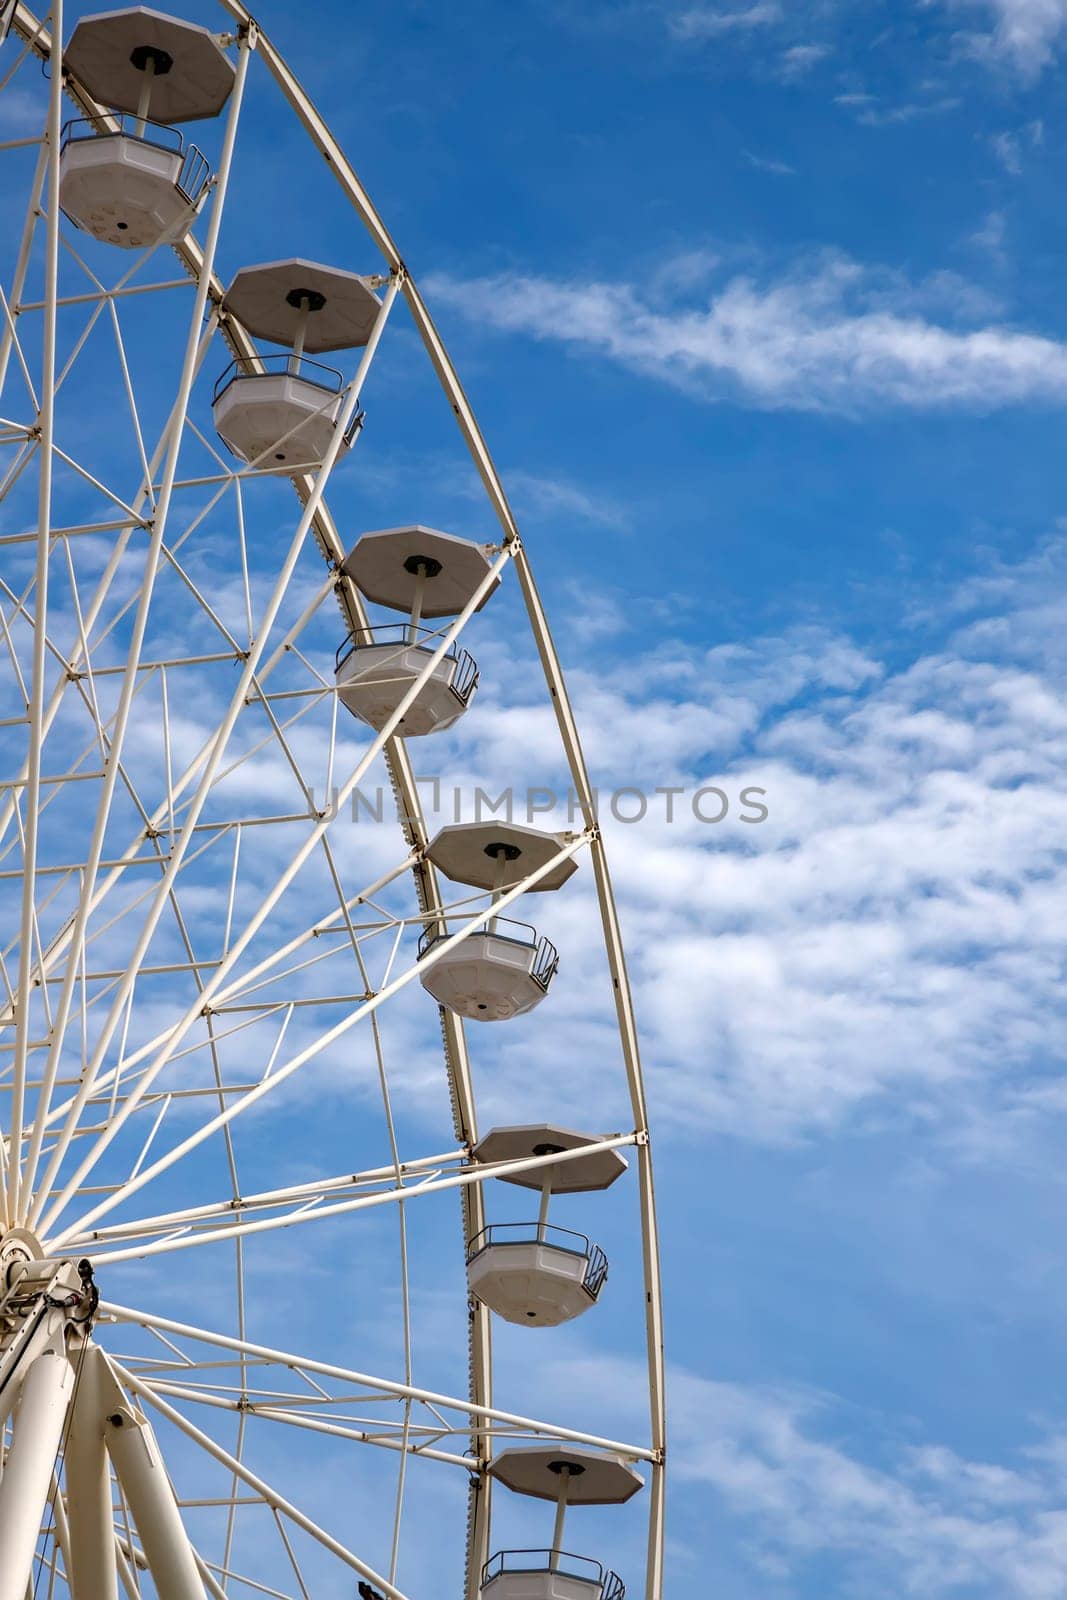 A part of the Ferris wheel against a cloudy blue sky by EdVal